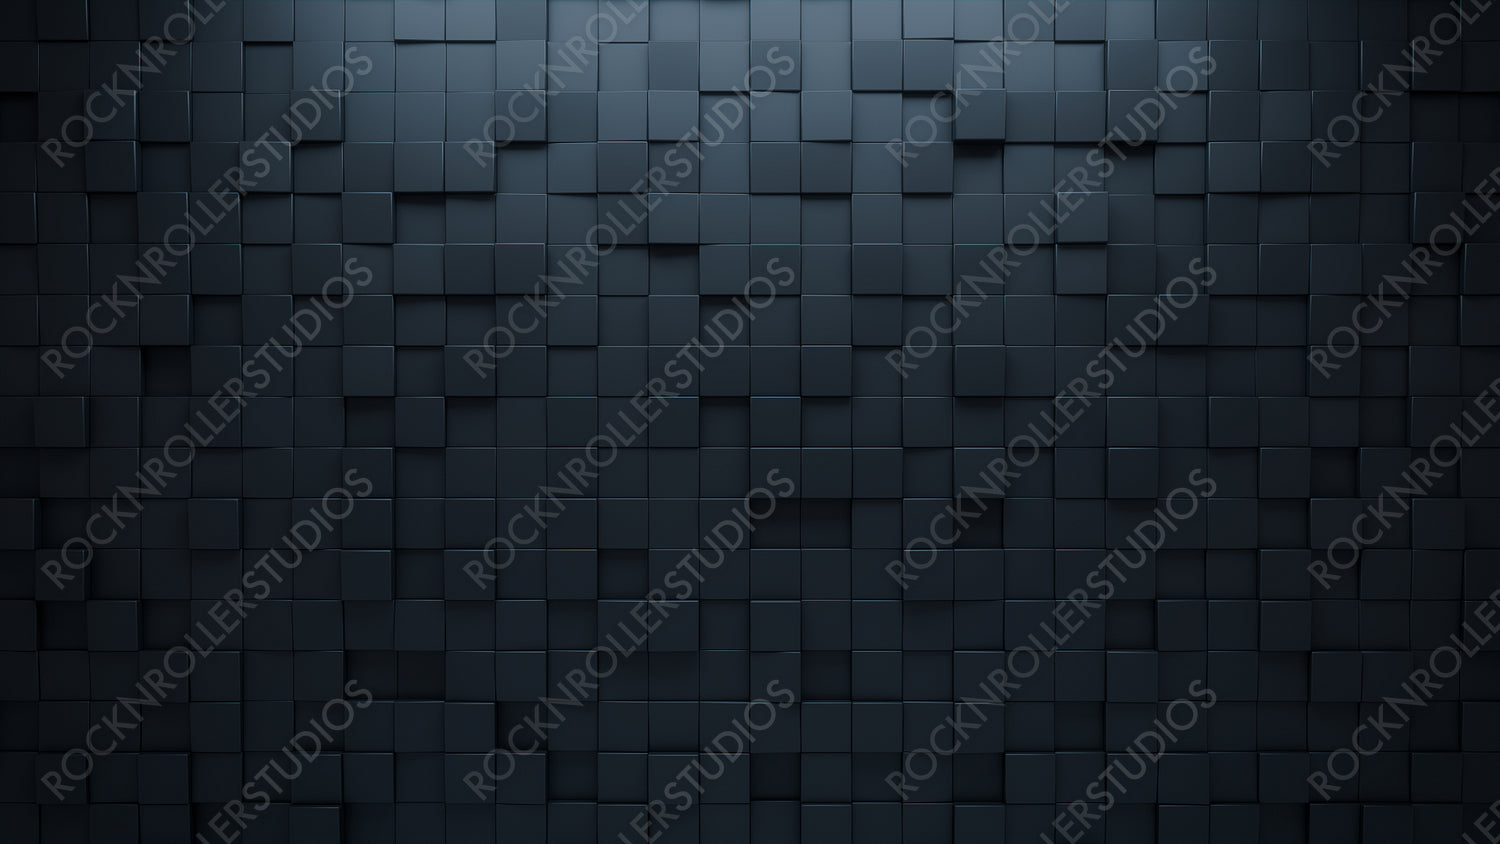 Futuristic, High Tech, dark background, with a square block structure. Wall texture with a 3D cube tile pattern. 3D render